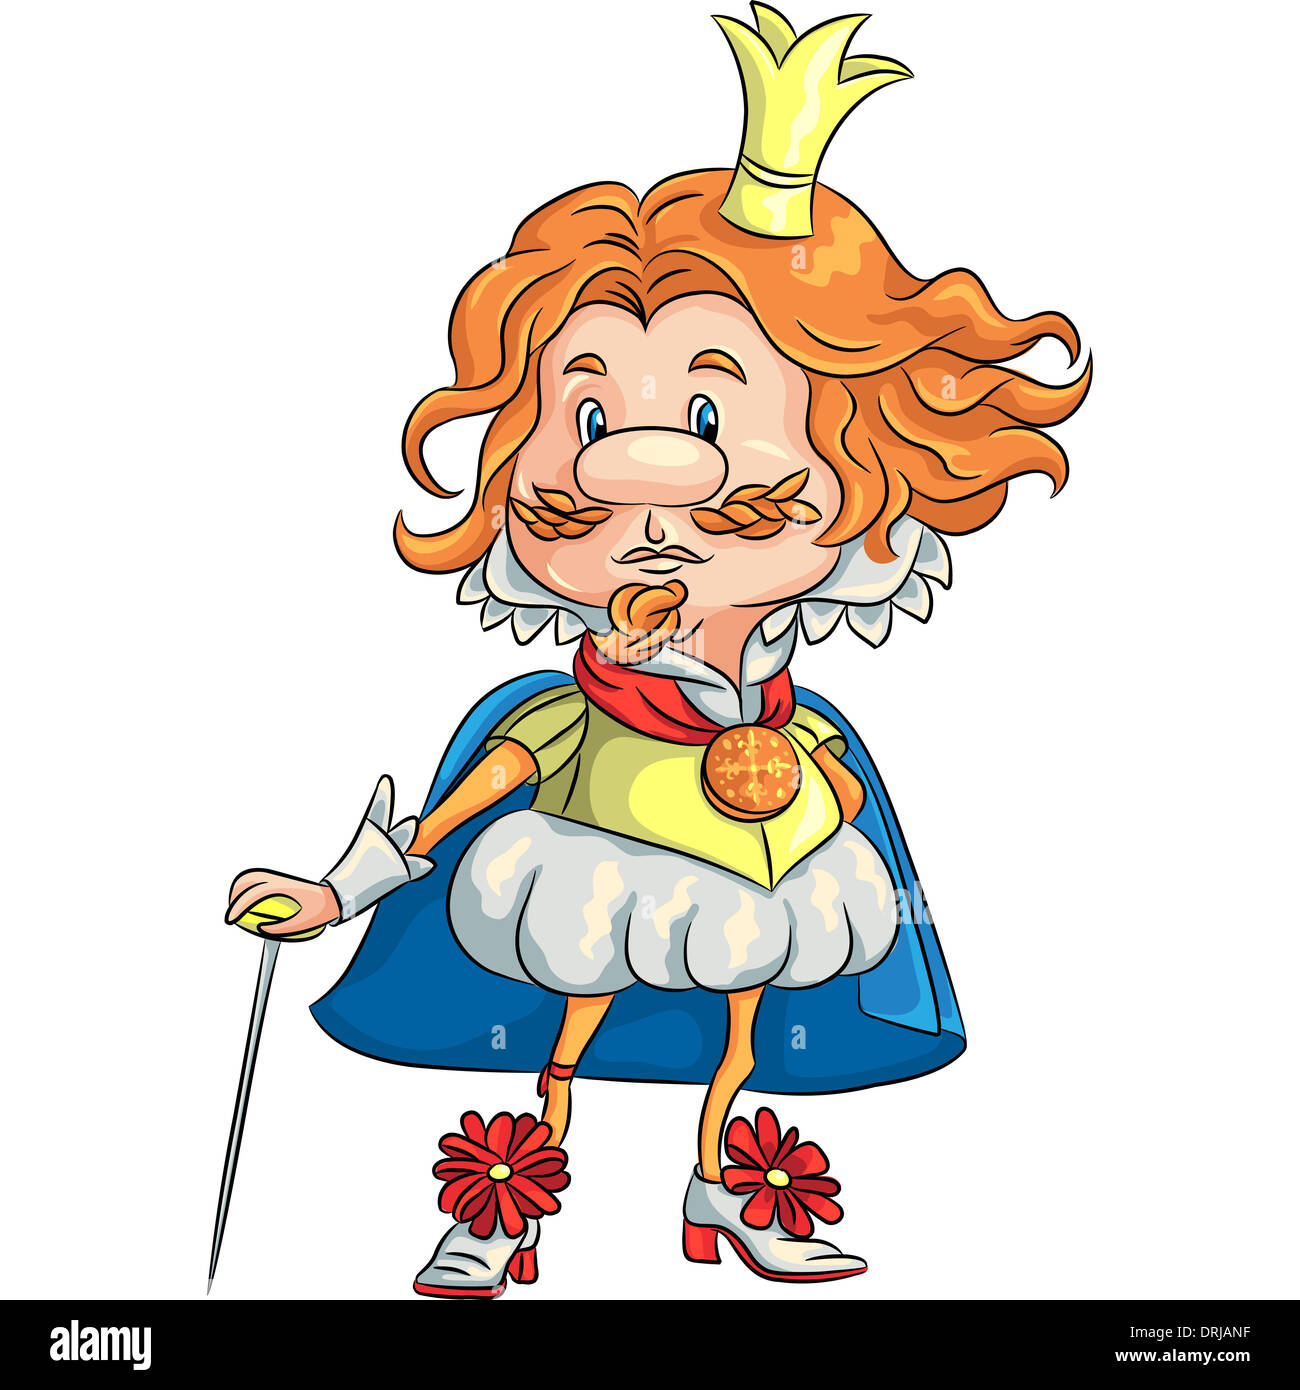 fairytale cartoon funny sad king with a golden crown Stock Photo